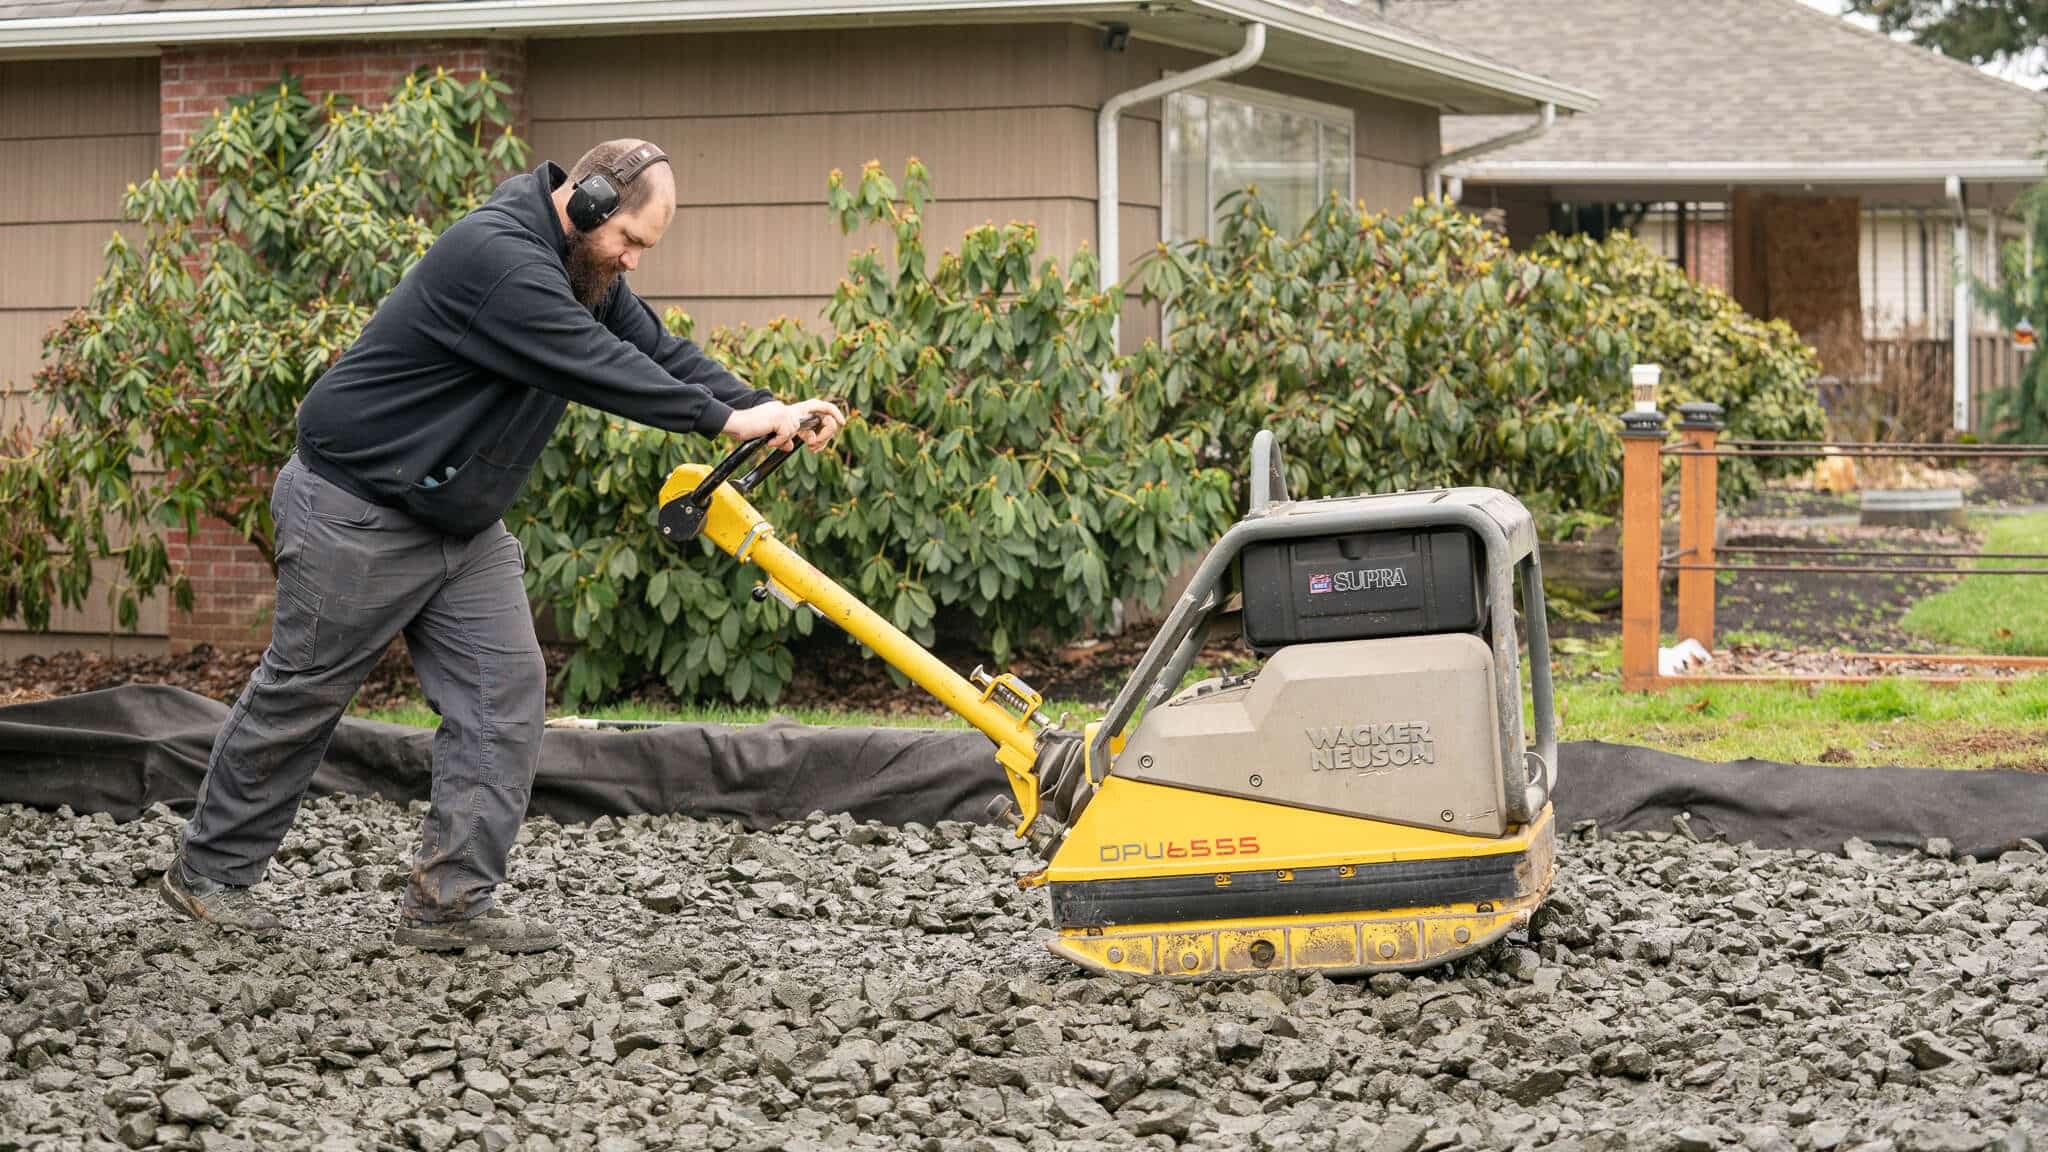 How to Select a Compactor for a Paver Base